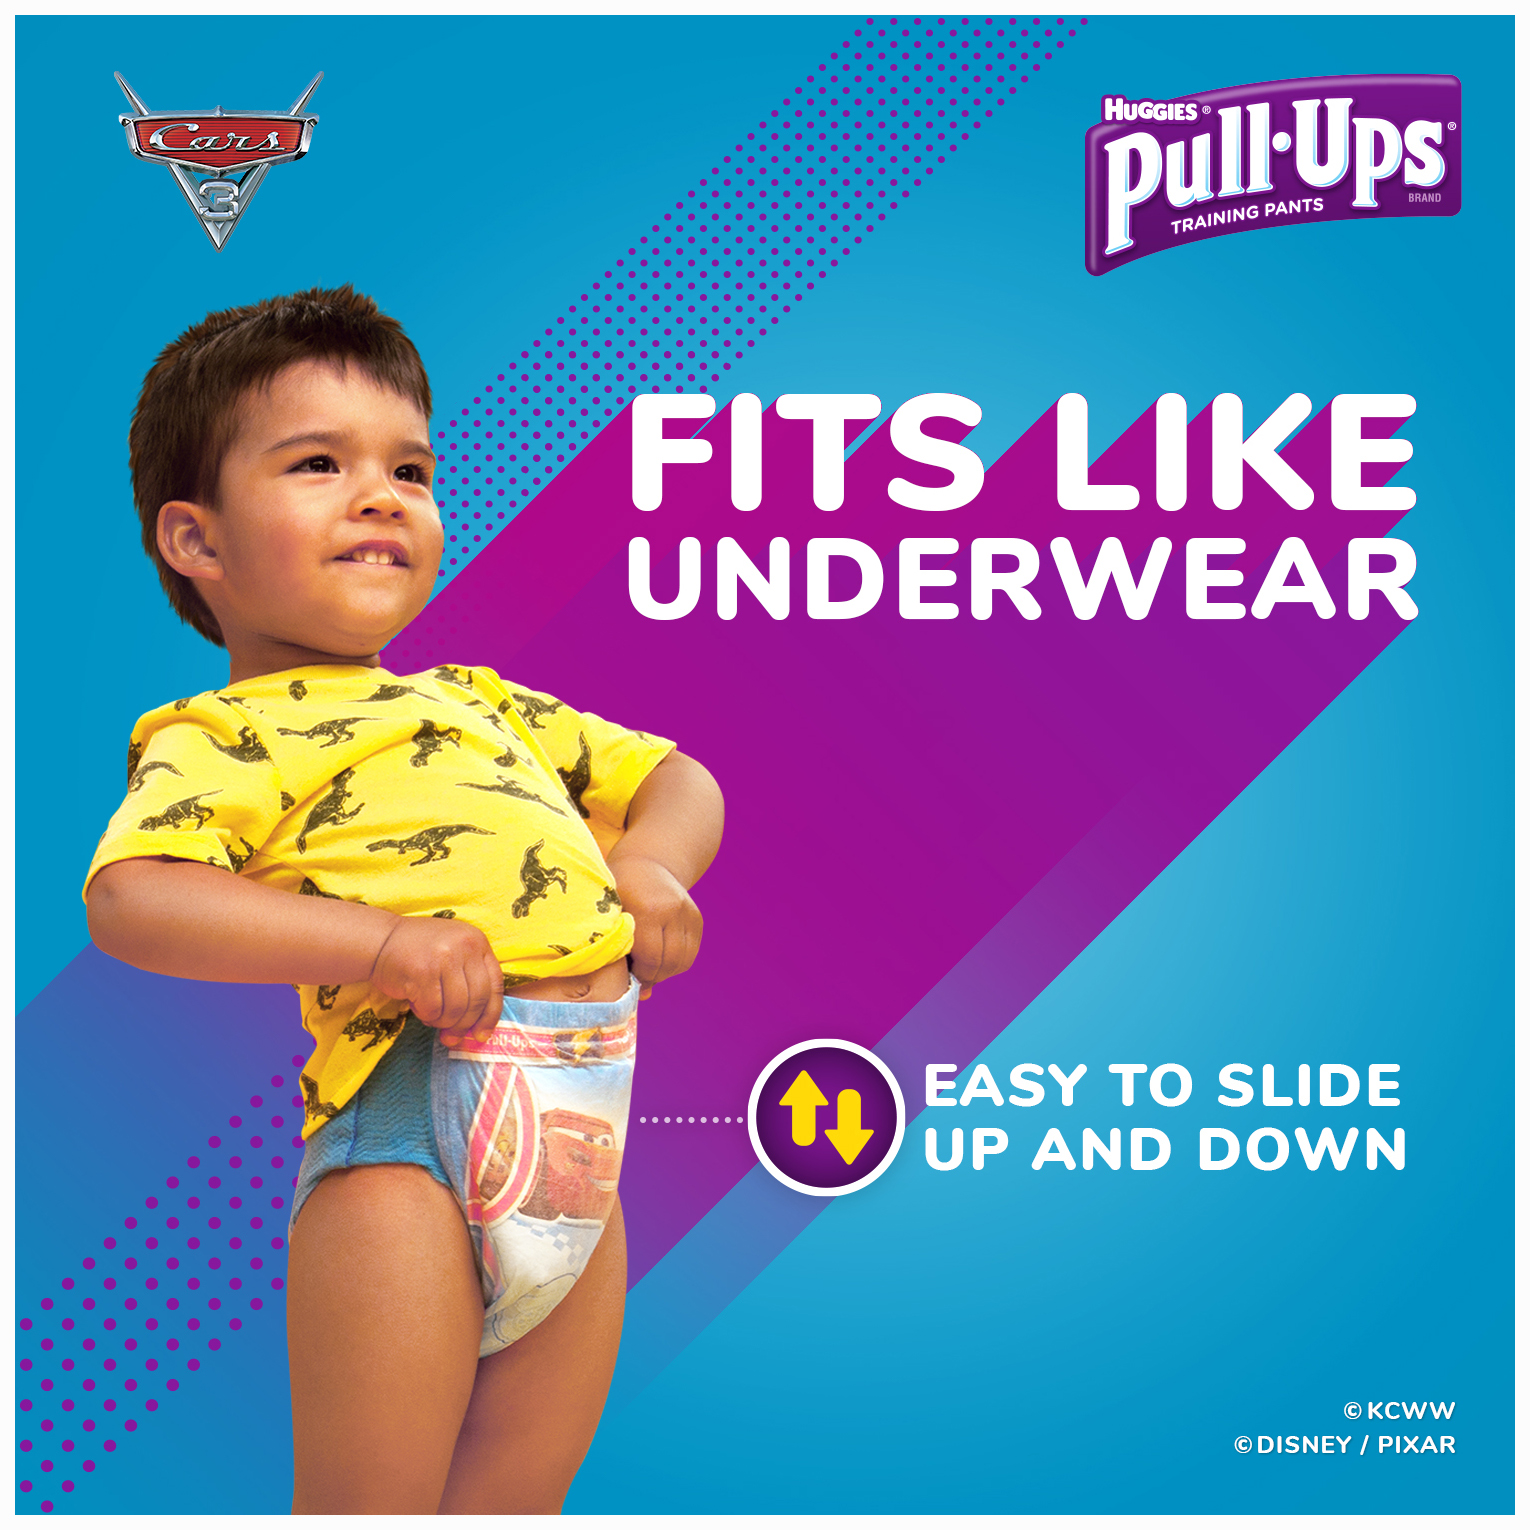 Pull-Ups Boys' Learning Designs Training Pants, Size 2T-3T, 25 Count - image 4 of 9